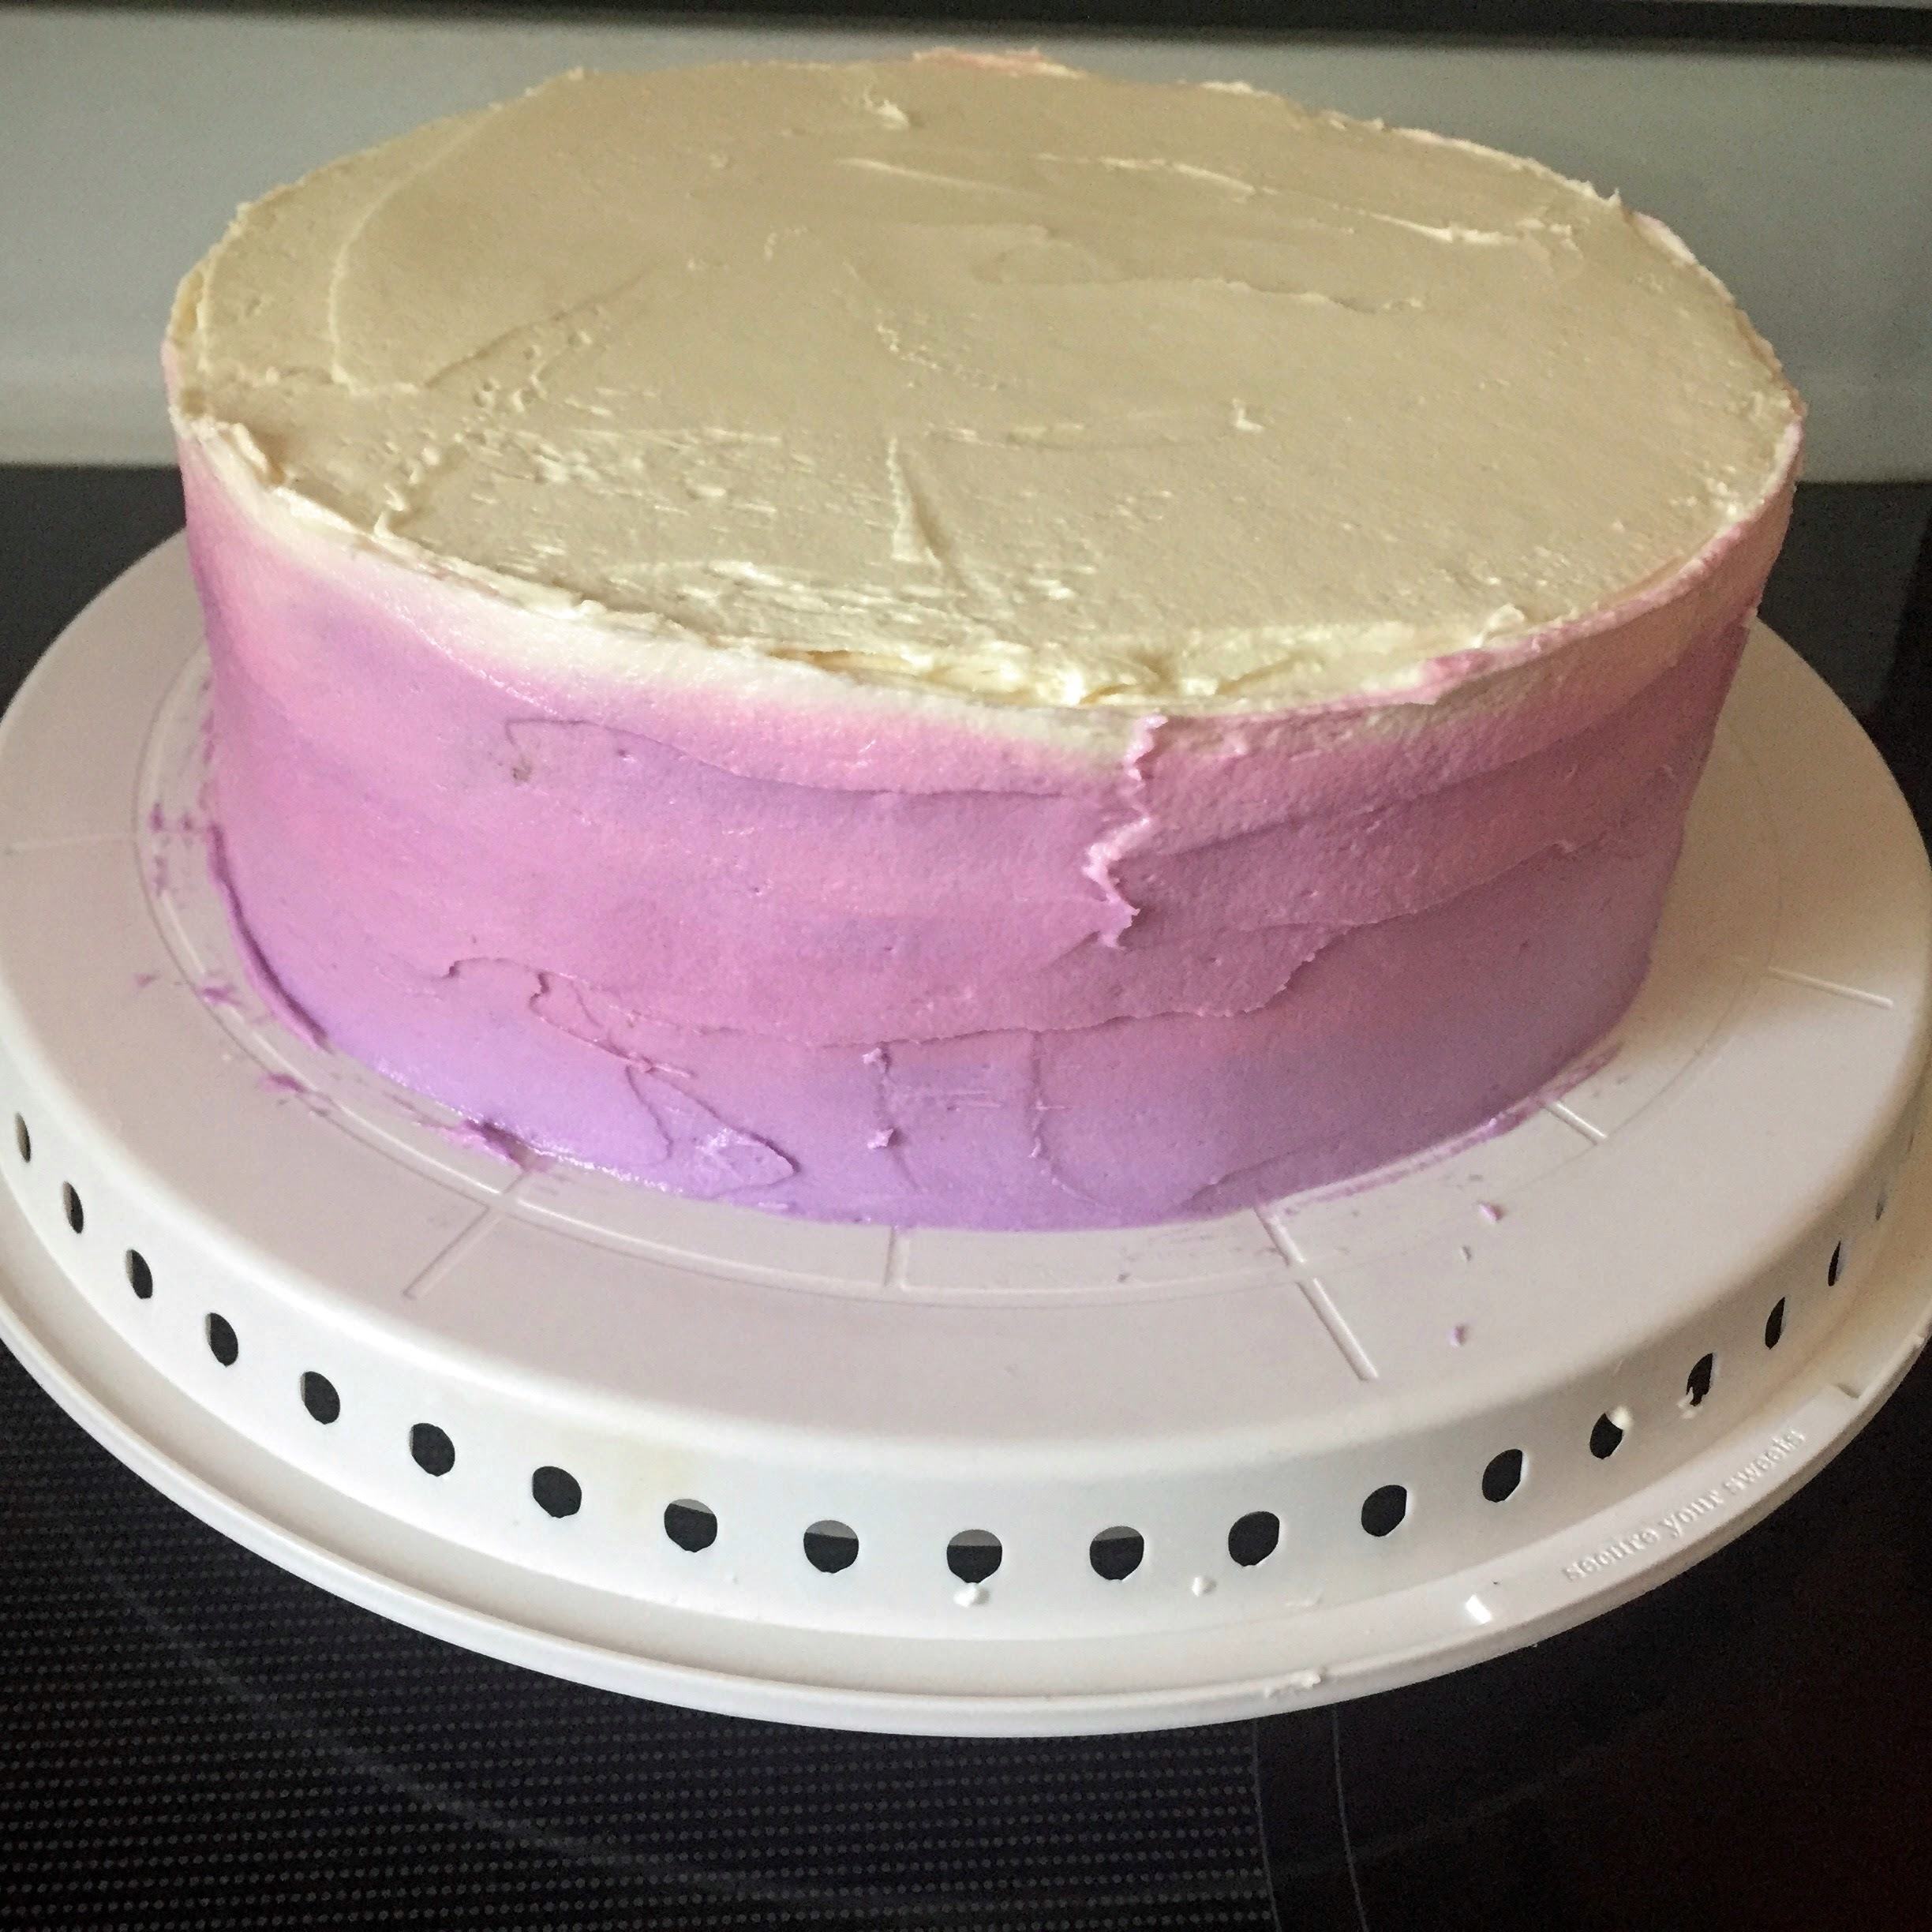 Continue to use the icing spatula to even out the layers of frosting, smoothing until the ombre is to your liking.